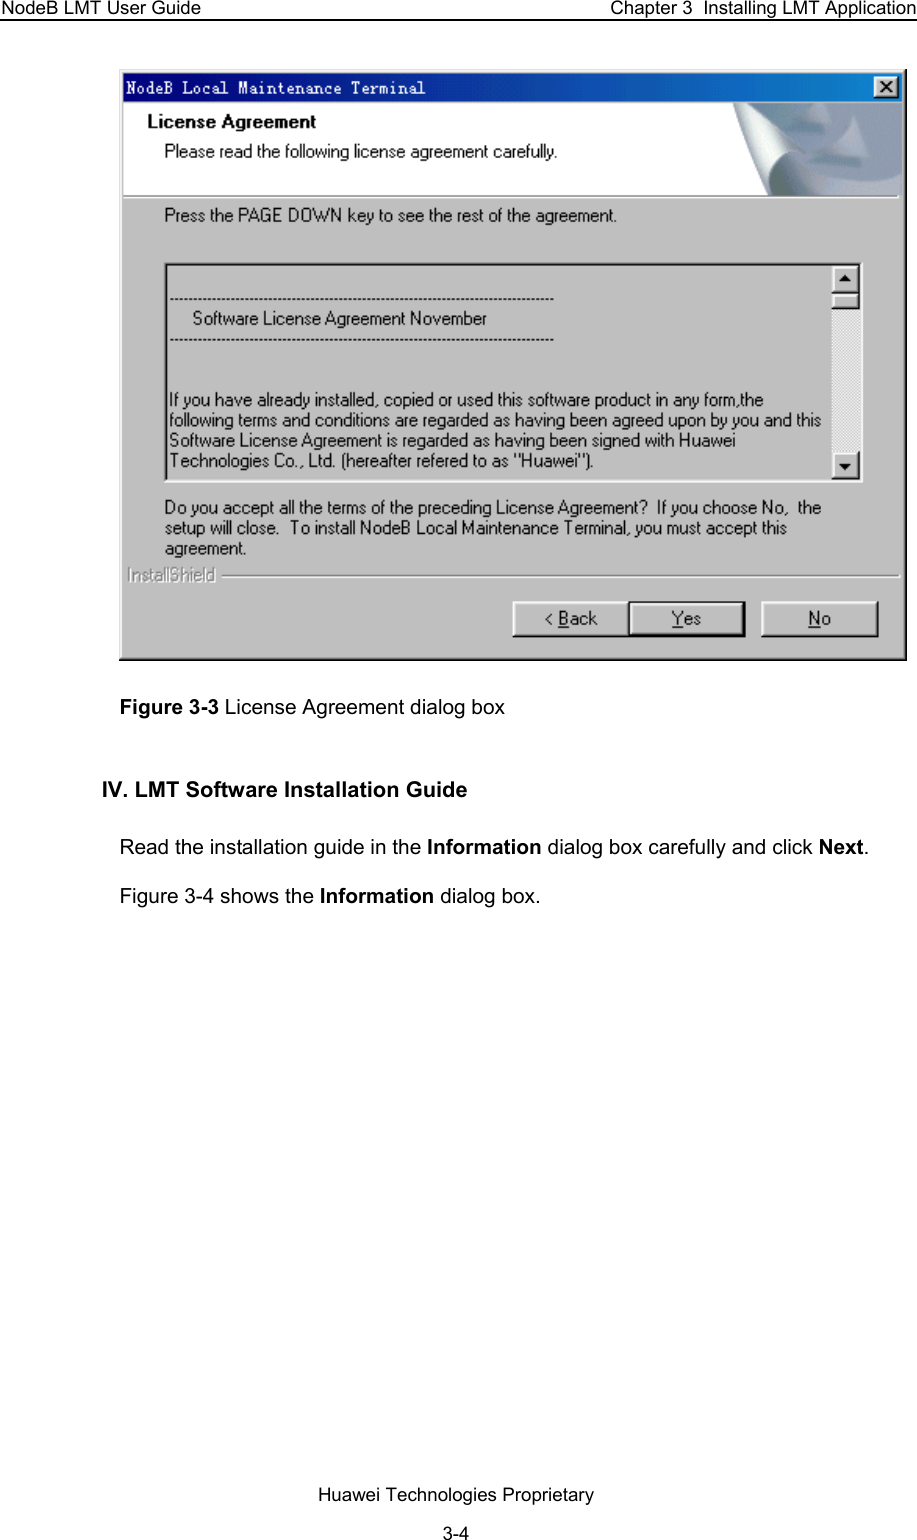 NodeB LMT User Guide  Chapter 3  Installing LMT Application  Figure 3-3 License Agreement dialog box IV. LMT Software Installation Guide Read the installation guide in the Information dialog box carefully and click Next.  Figure 3-4 shows the Information dialog box.  Huawei Technologies Proprietary 3-4 